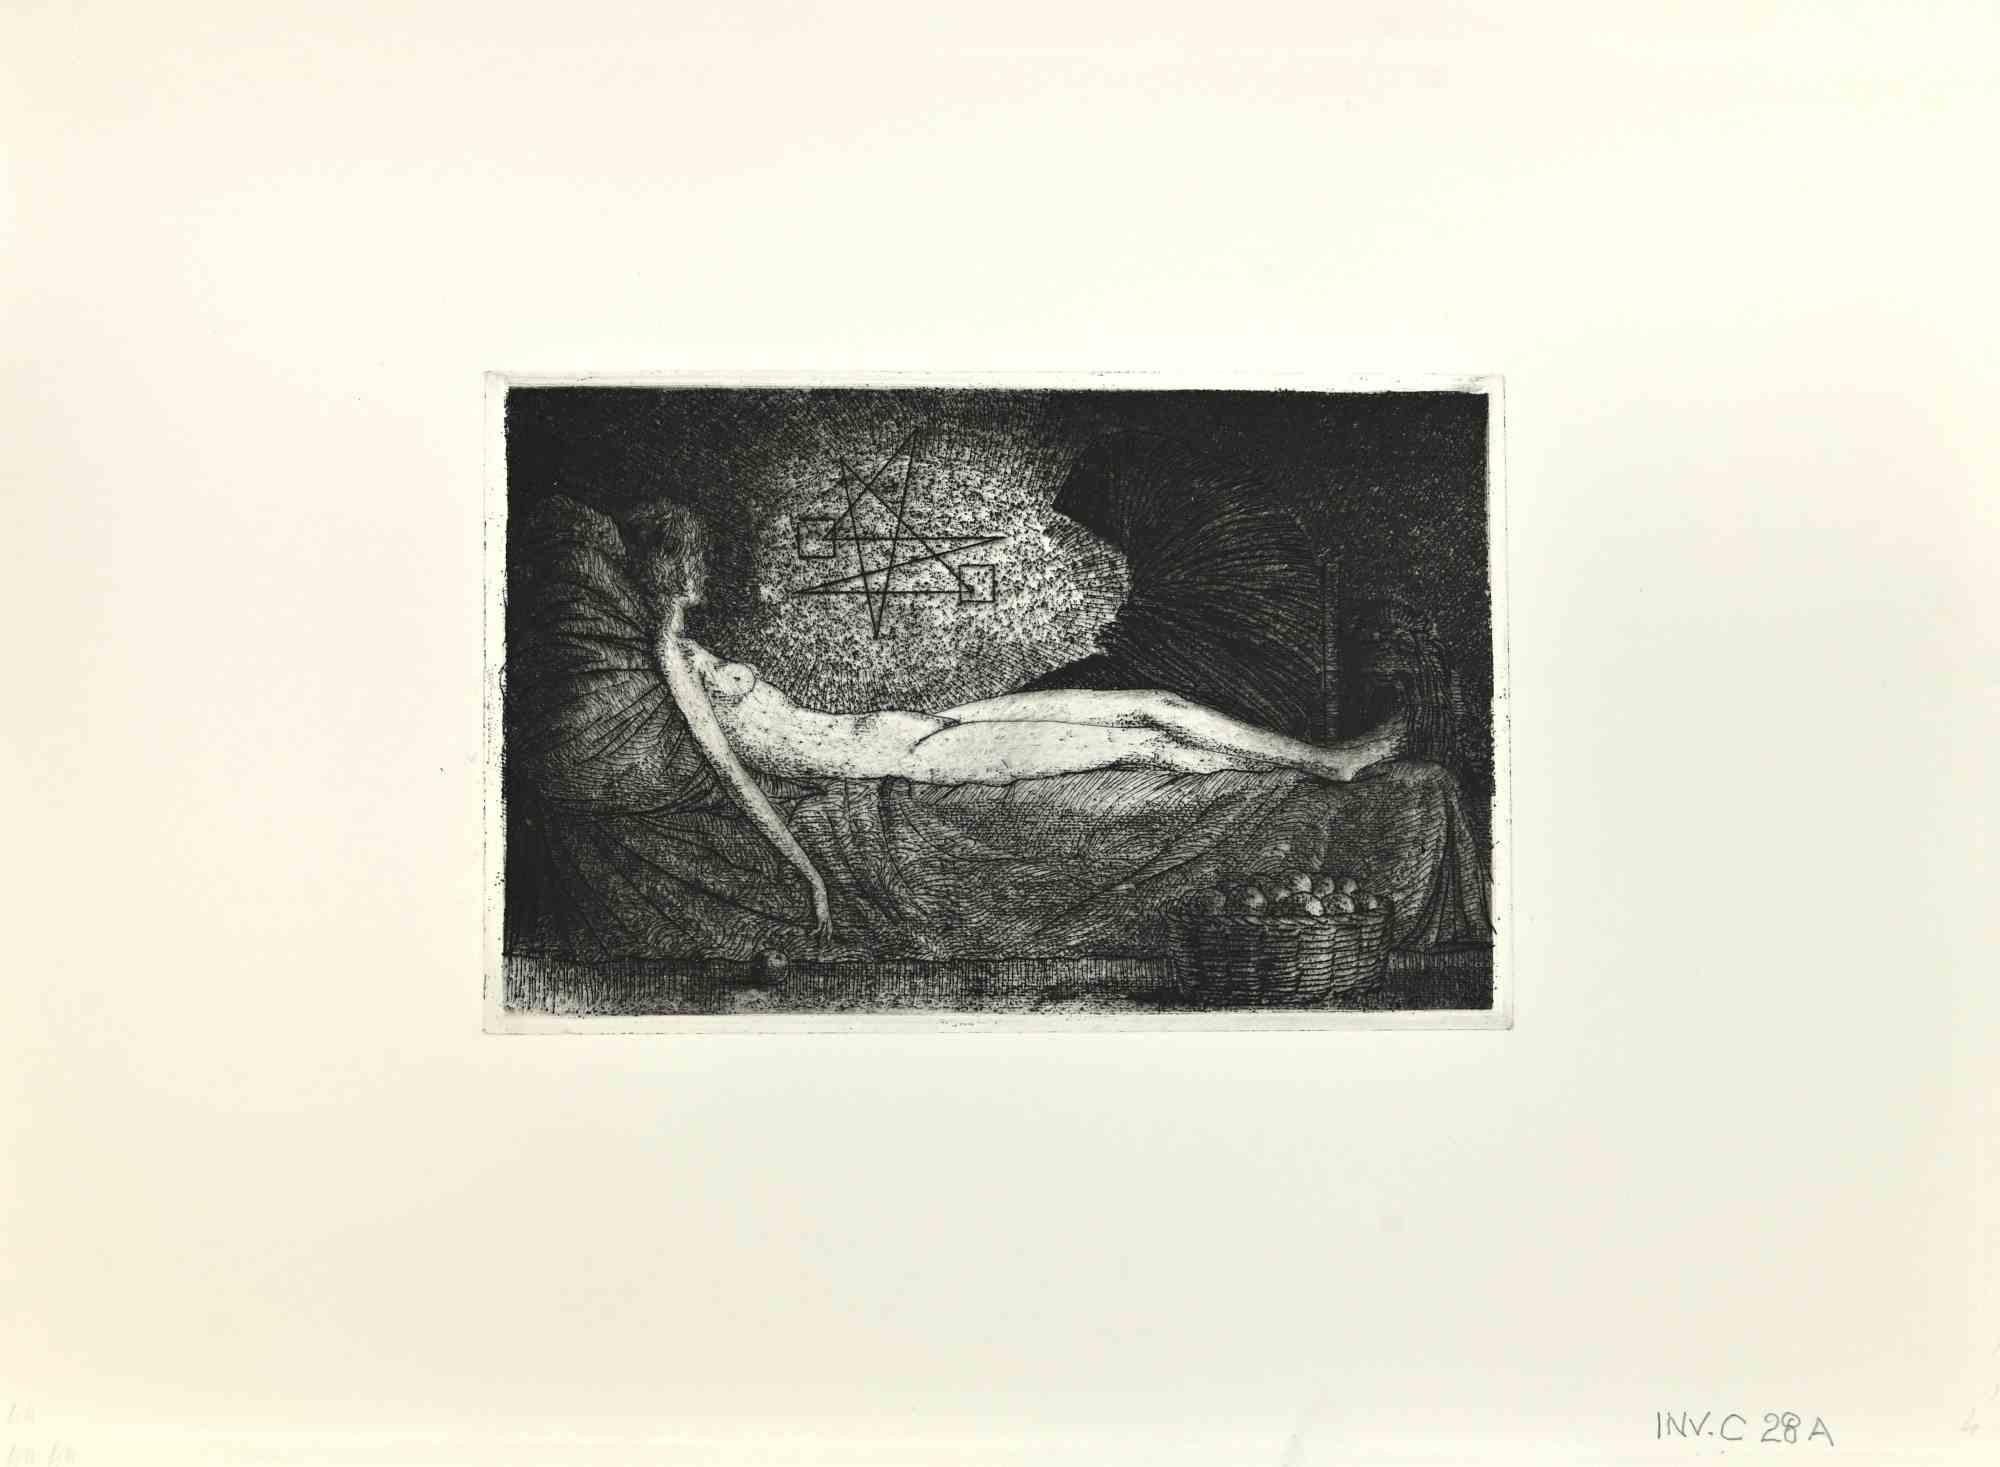 The Vision is an artwork realized by the Contemporary Italian artist  Leo Guida (1992 - 2017) in the 1970s.

Black and white etching on paper.

Good conditions with a slight scratch on the left margin.

Leo Guida  (1992 - 2017). Sensitive to current